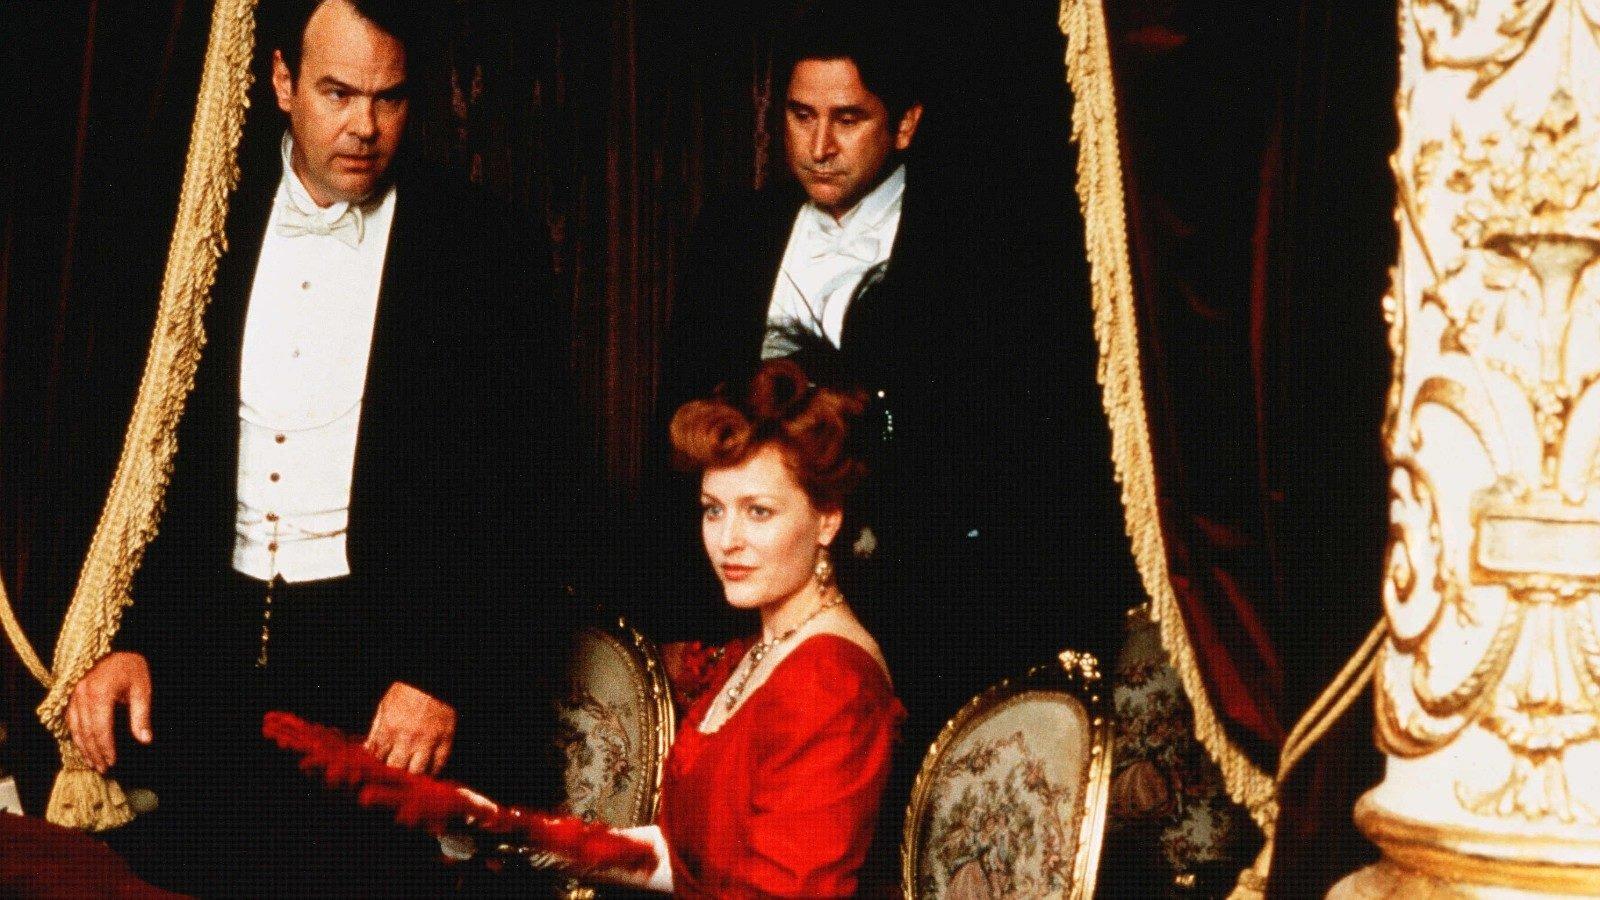 Dan Akroyd, Gillian Anderson and Anthony LaPaglia in The House of Mirth. Manderston in Berwickshire and Gosford in East Lothian were the primary locations for Terence Davies’ 2000 adaptation of Edith Wharton’s 1905 novel.